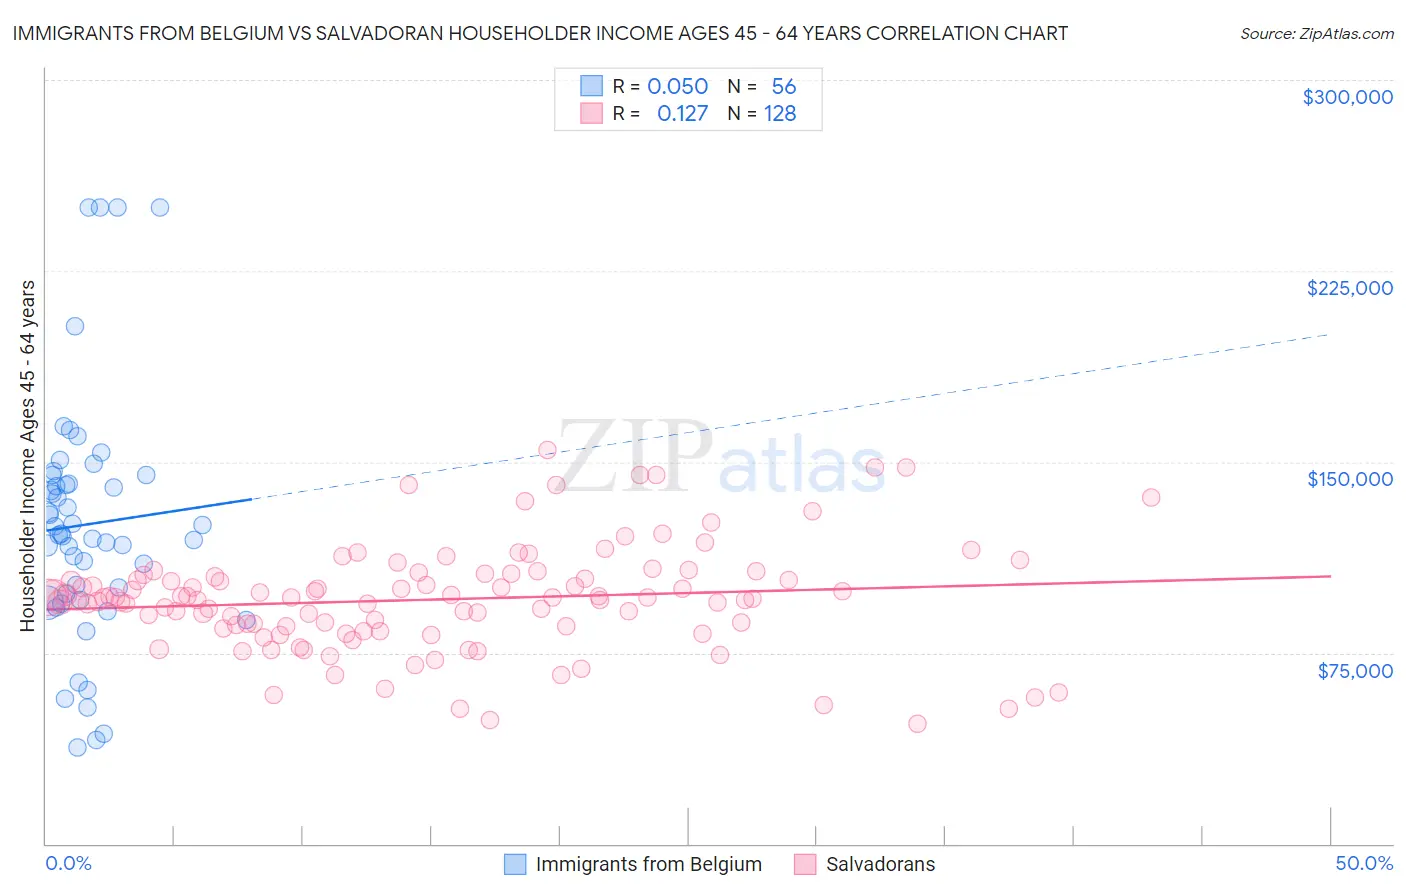 Immigrants from Belgium vs Salvadoran Householder Income Ages 45 - 64 years